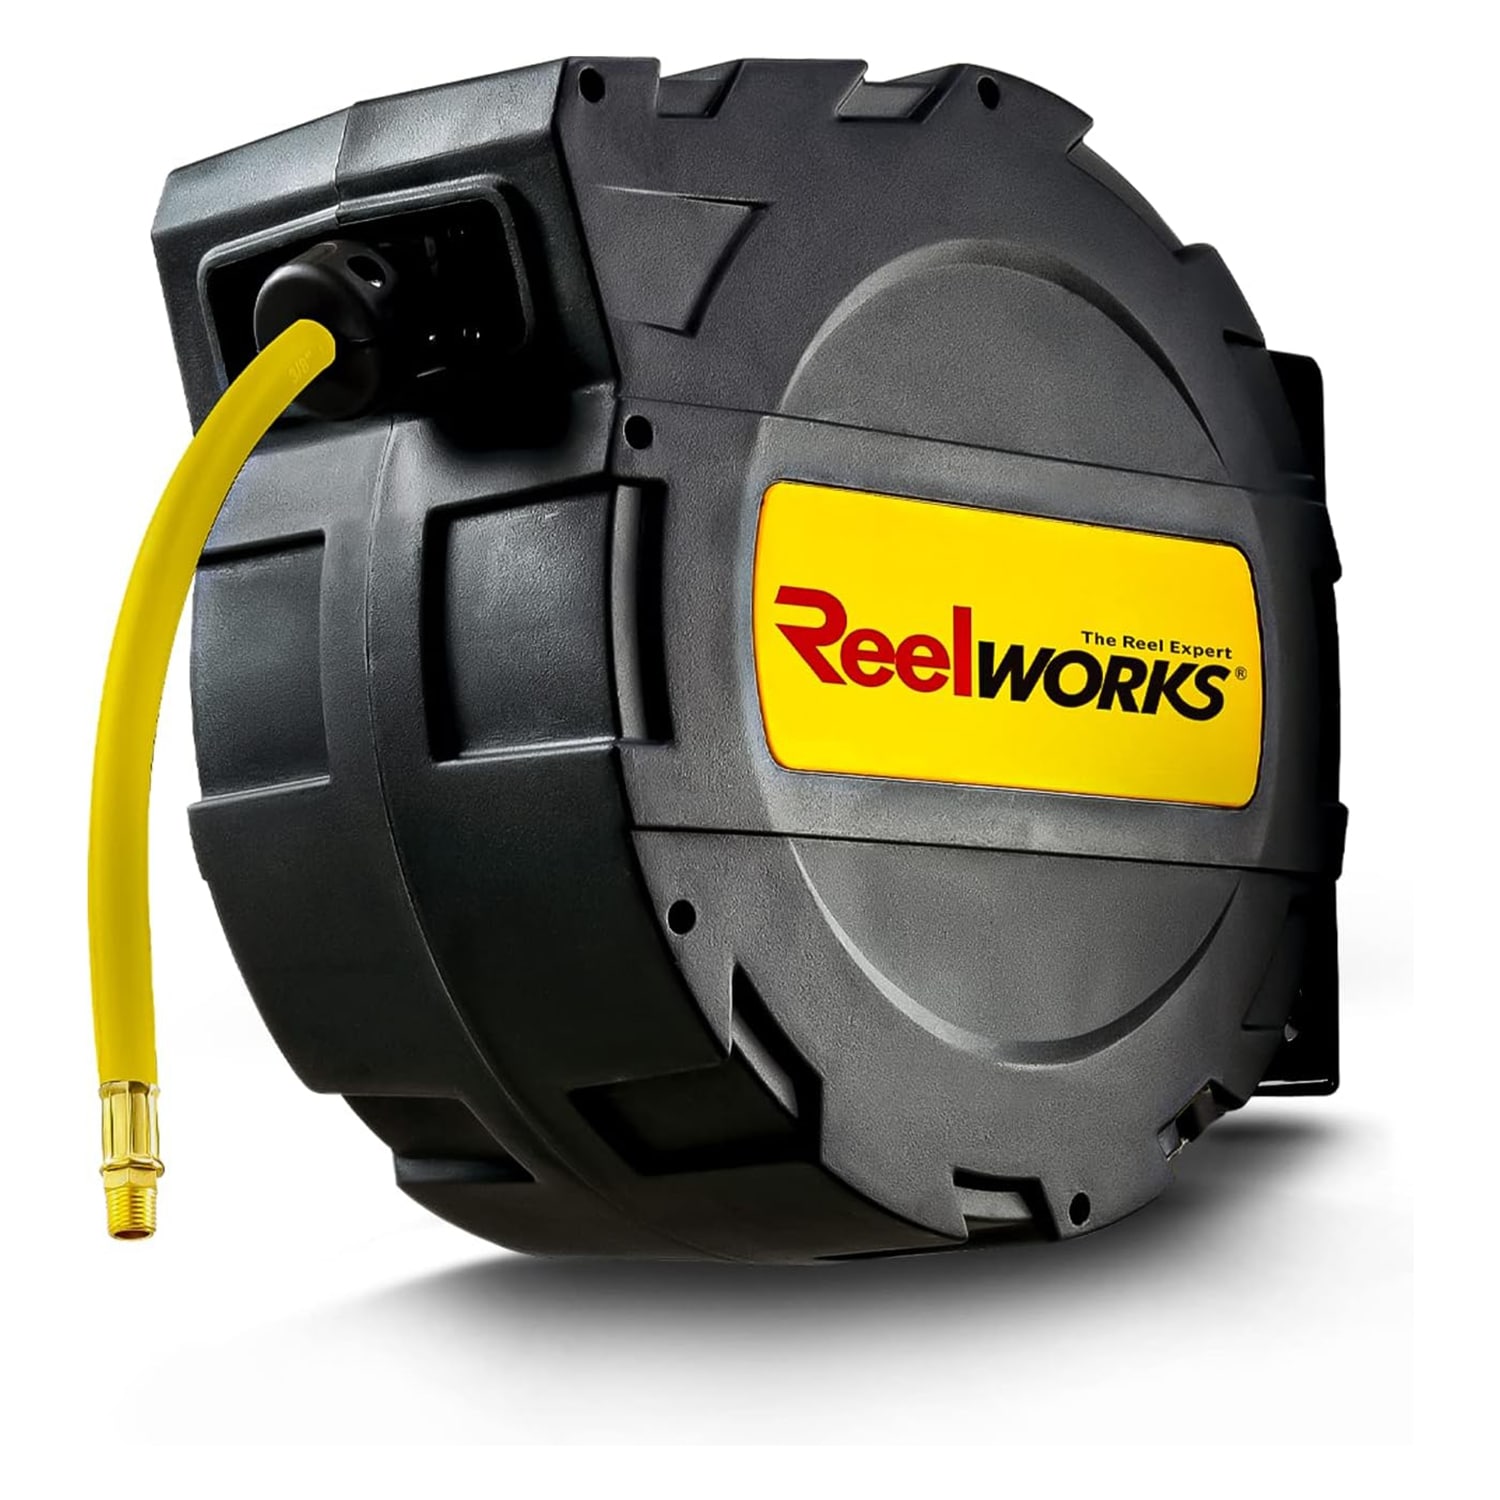 Reelworks Air Hose Reel Swivel Mount- 3/8 In X 50 Ft, 3 Ft Lead-in, 1/4 In  Npt Fittings in the Air Compressor Hoses department at